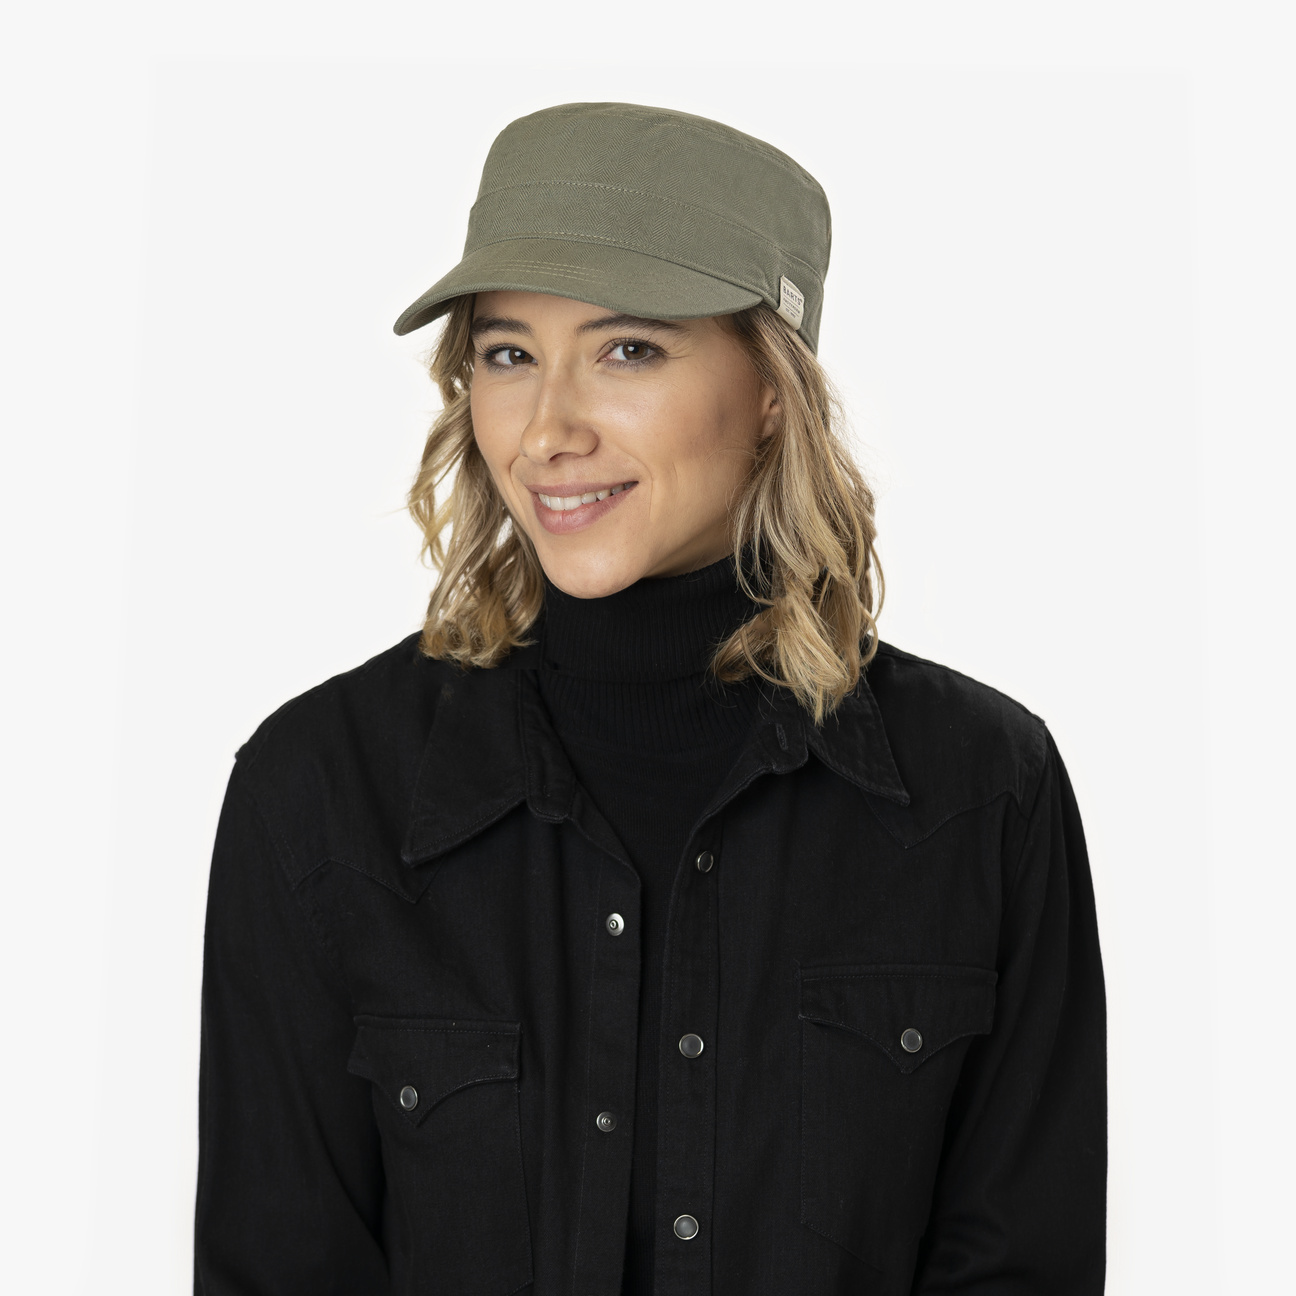 Army by Montania kr - Barts 389,00 Cap